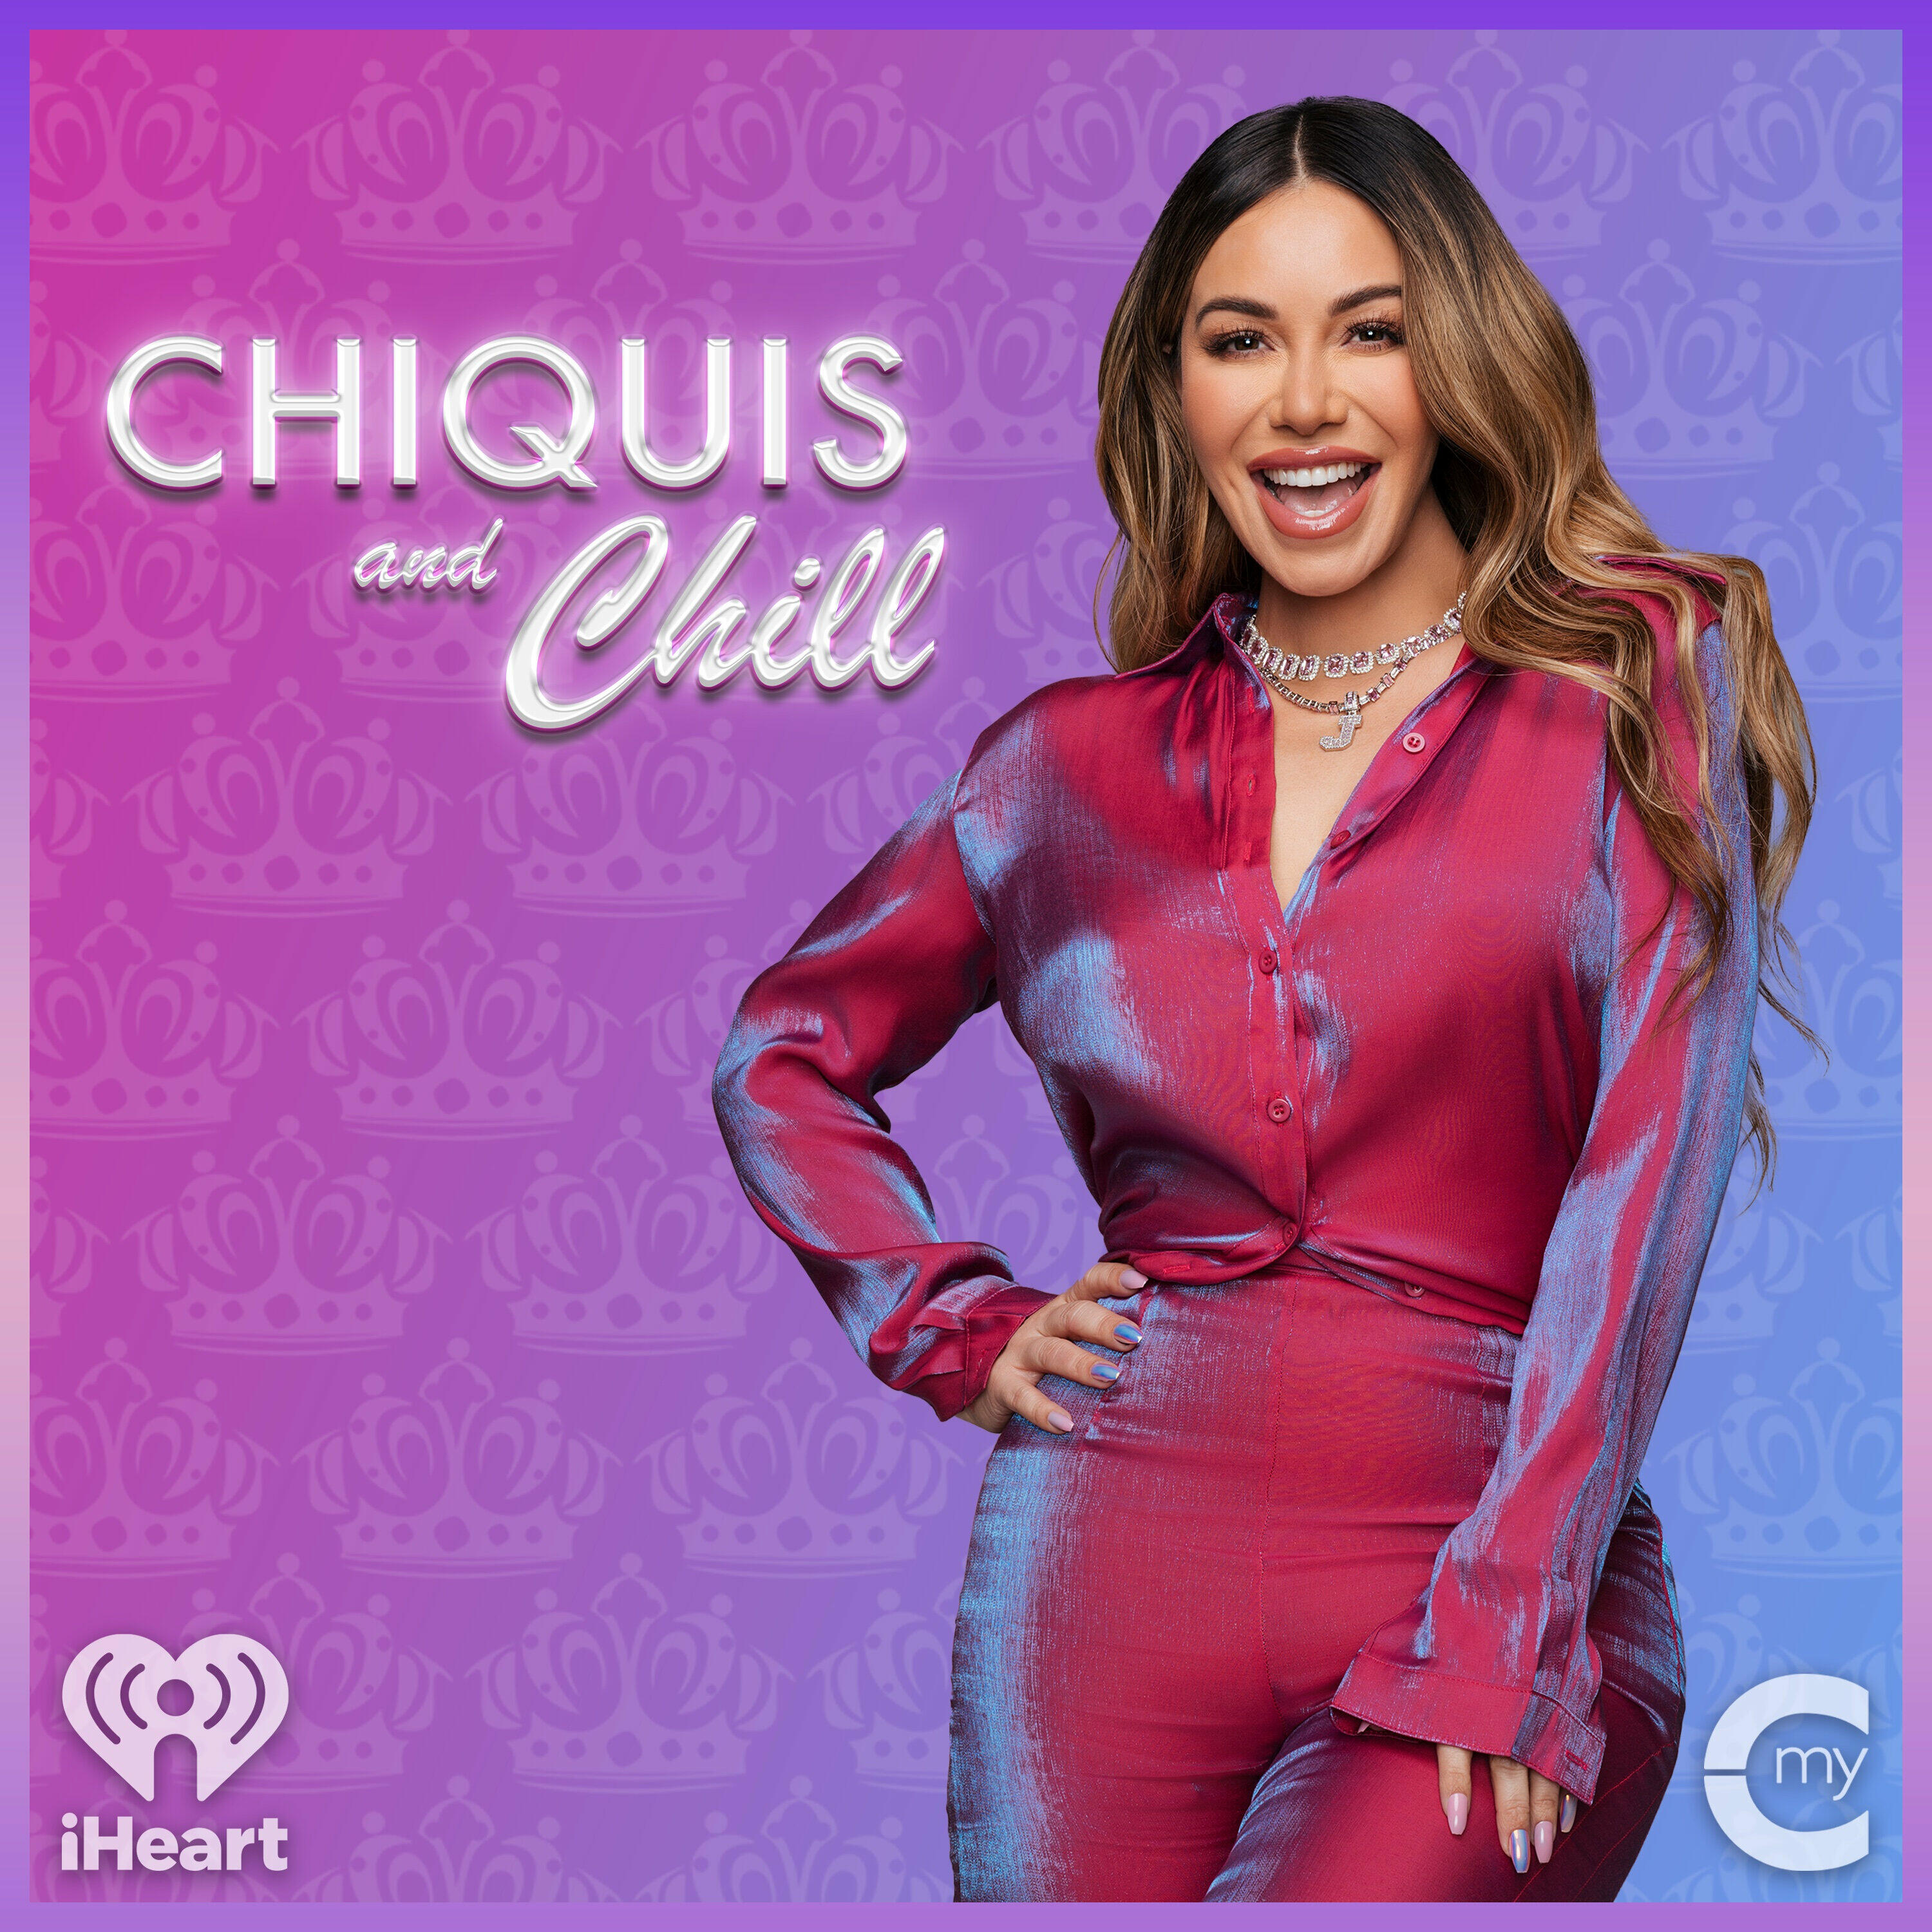 Chiquis and Chill iHeart